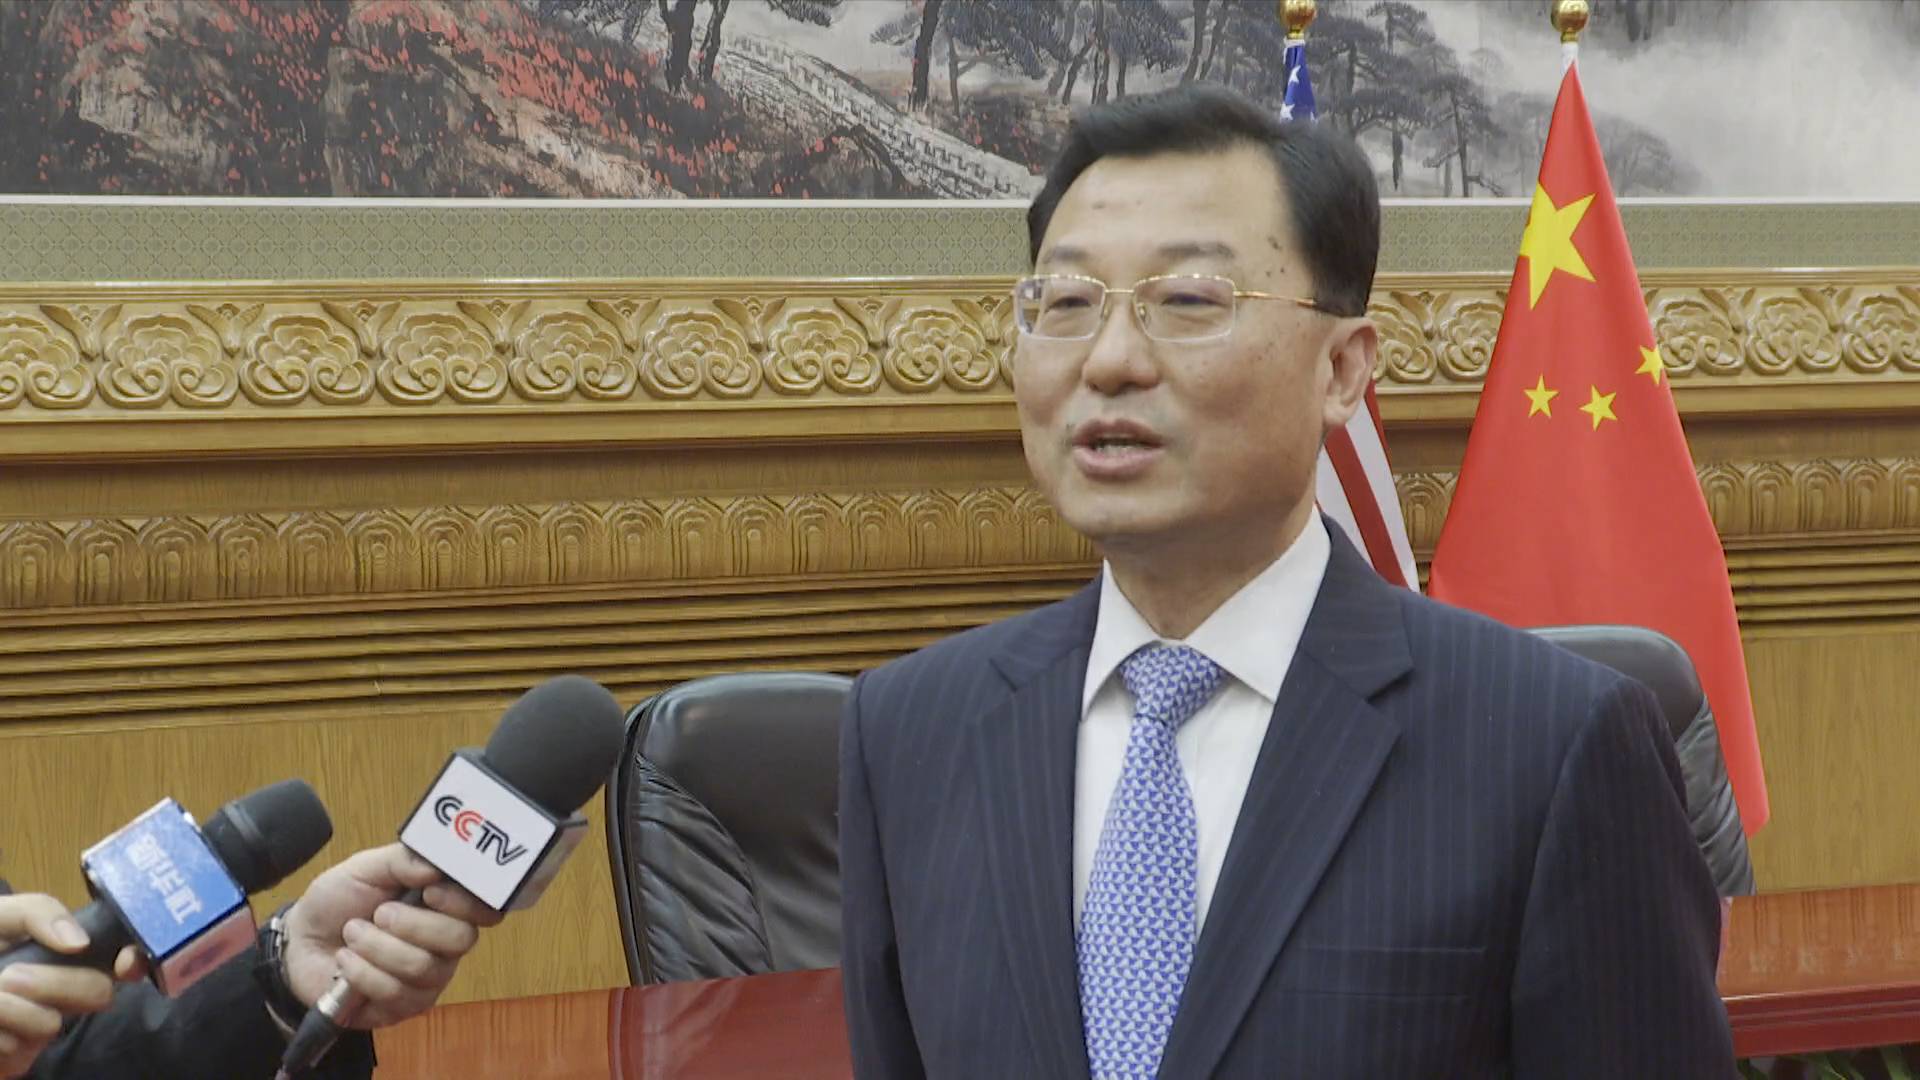 GLOBALink | Competition must be fair, healthy: Chinese vice FM on China-U.S. relations